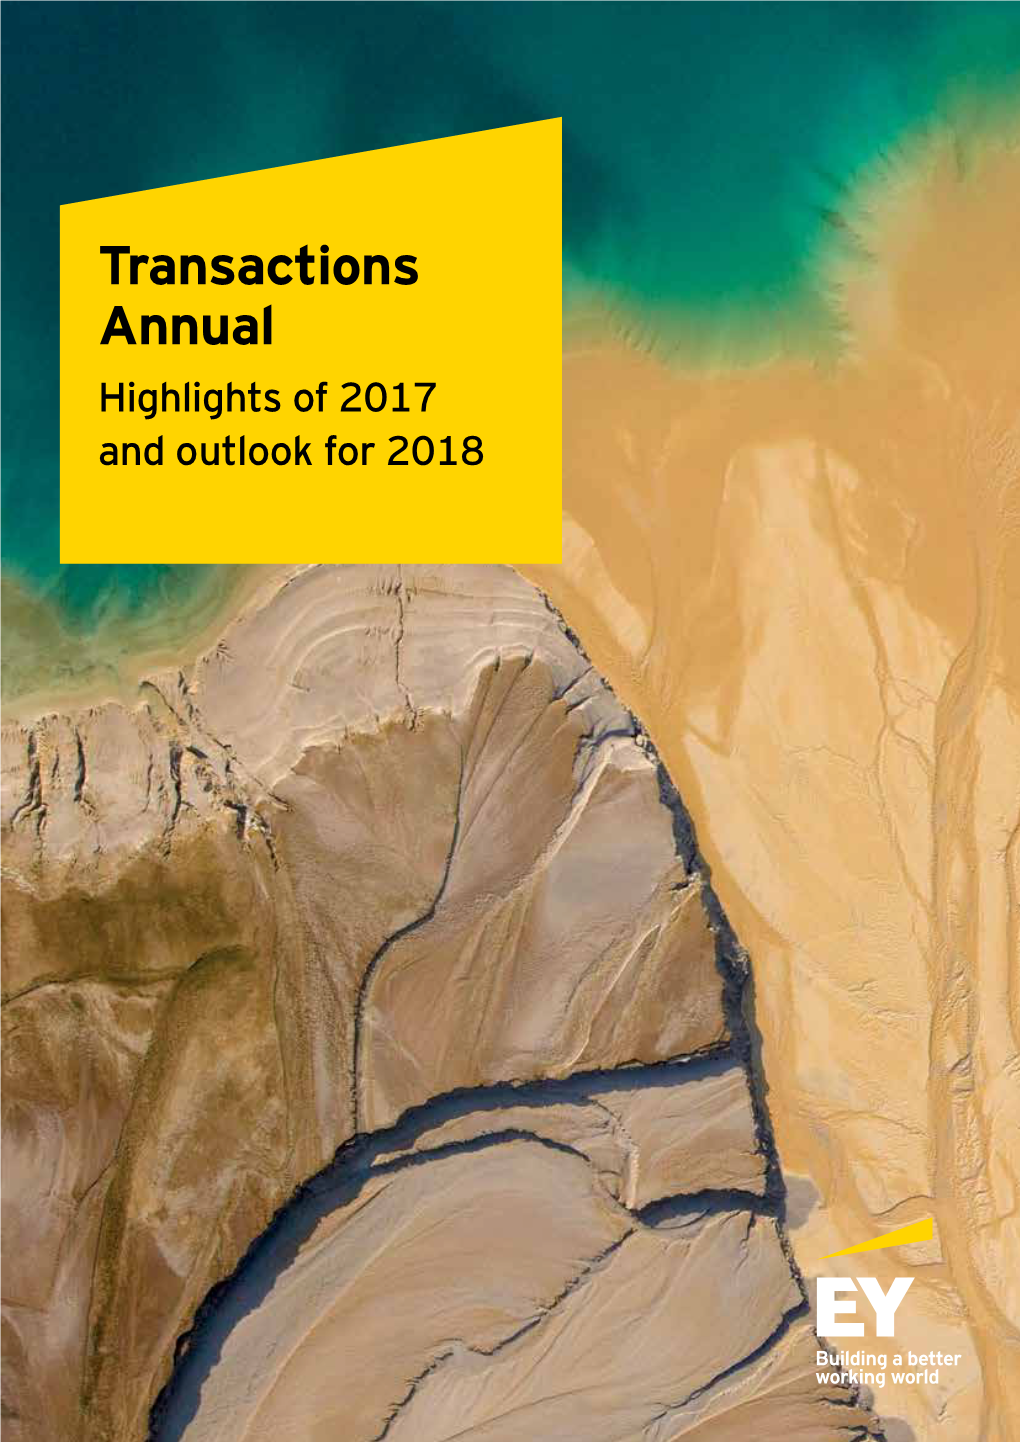 Transactions Annual Highlights of 2017 and Outlook for 2018 Contents